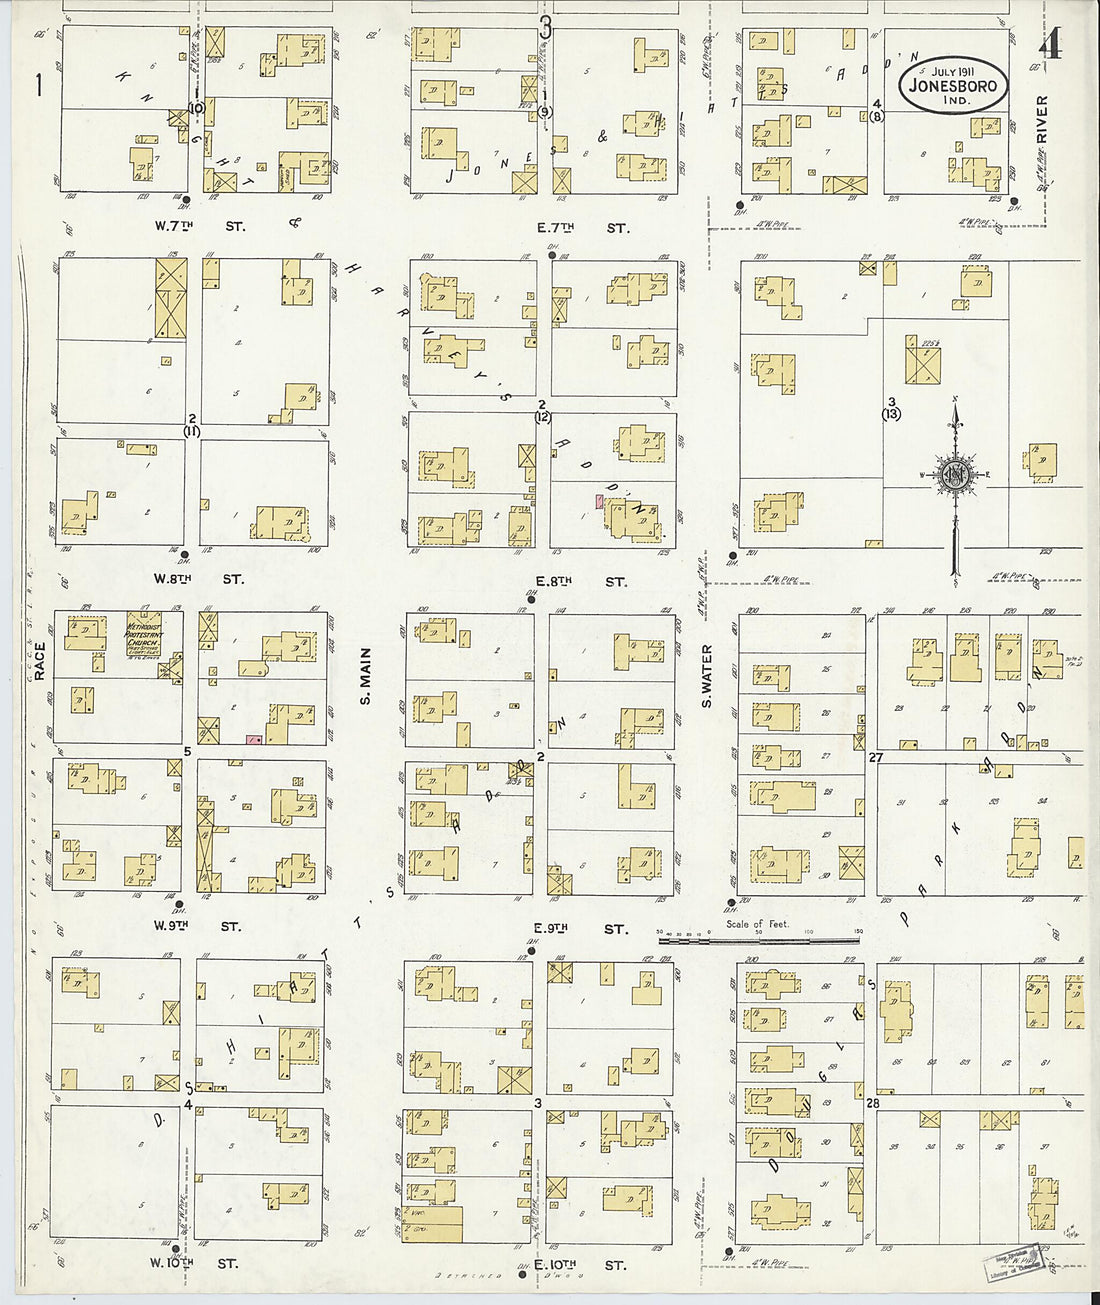 This old map of Jonesboro, Grant County, Indiana was created by Sanborn Map Company in 1911